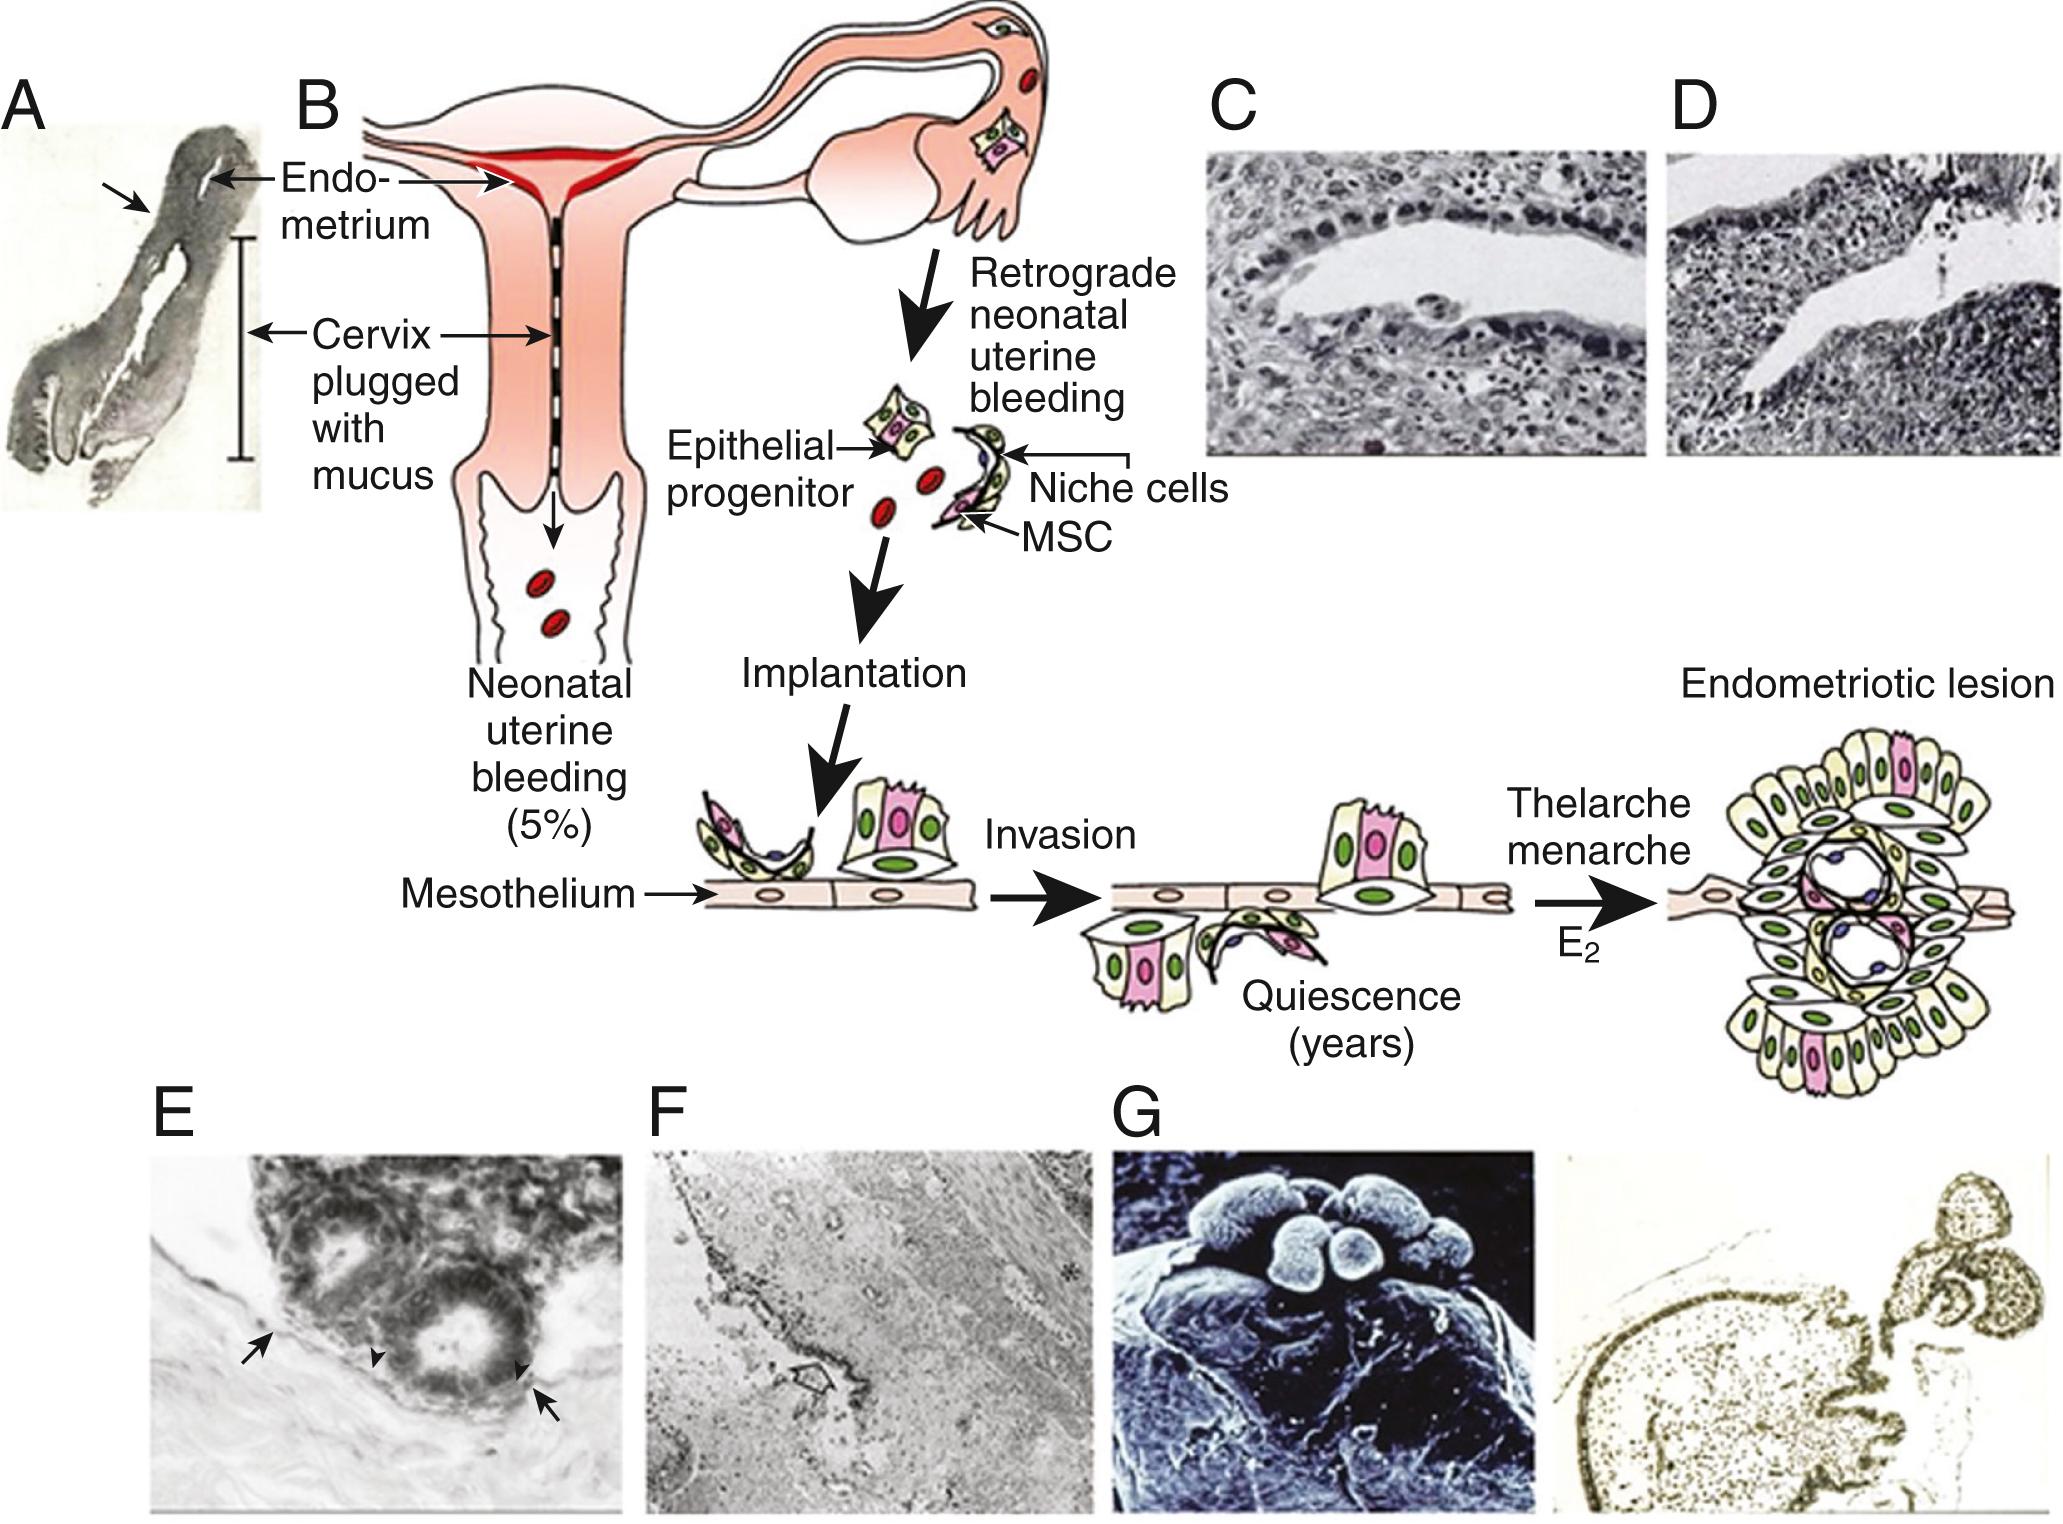 Fig. 27.10, Schematic describing the hypothesis that endometrial stem/progenitor cells may play a role in early-onset endometriosis with supporting images from published works.